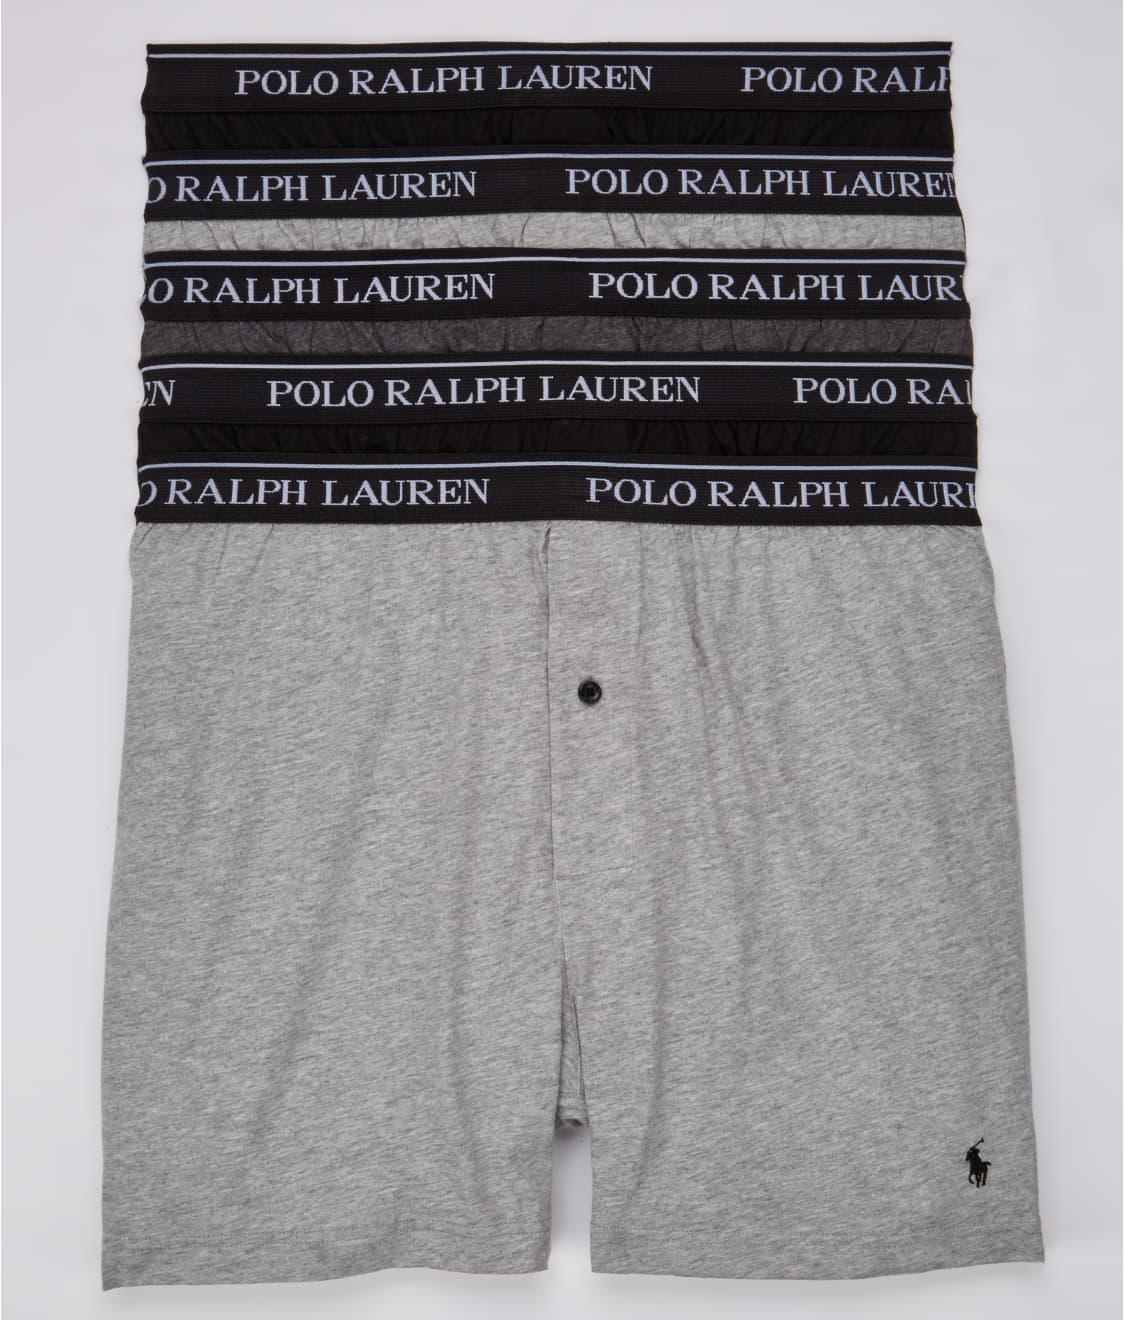 Polo Ralph Lauren: Classic Fit Cotton Wicking Knit Boxers 5-Pack NCKBP5